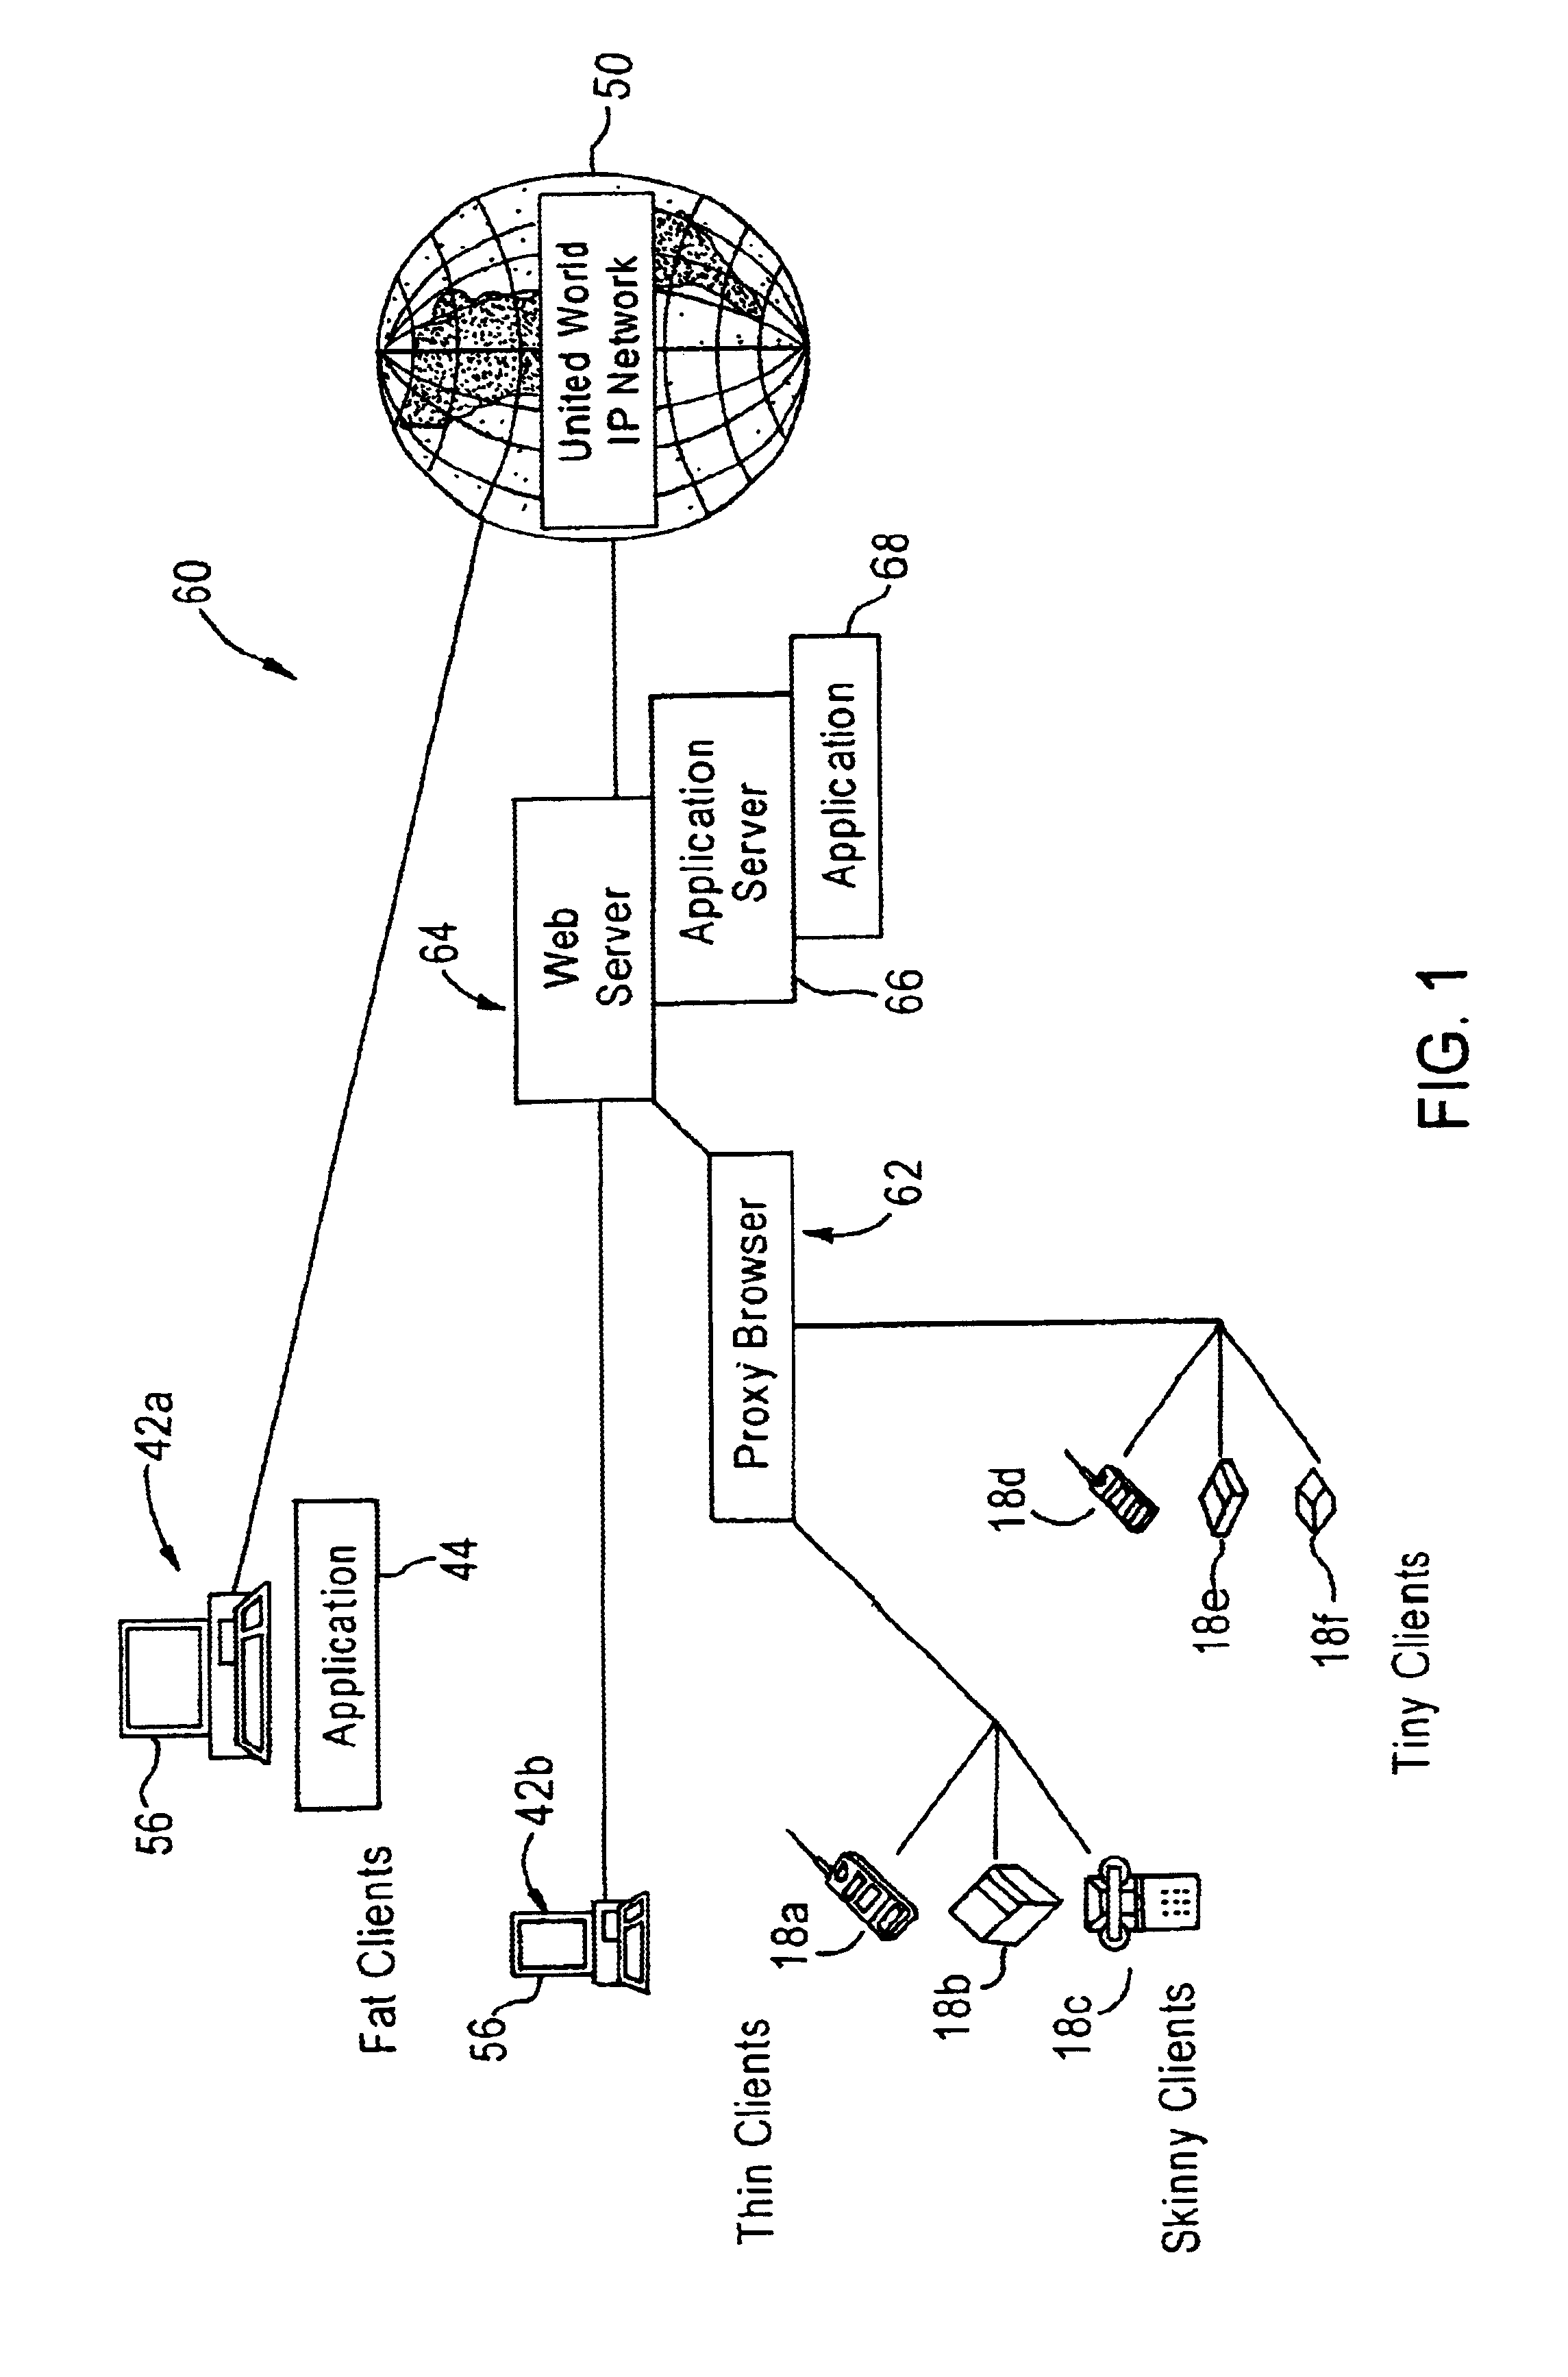 Apparatus and method for providing server state and attribute management for multiple-threaded voice enabled web applications